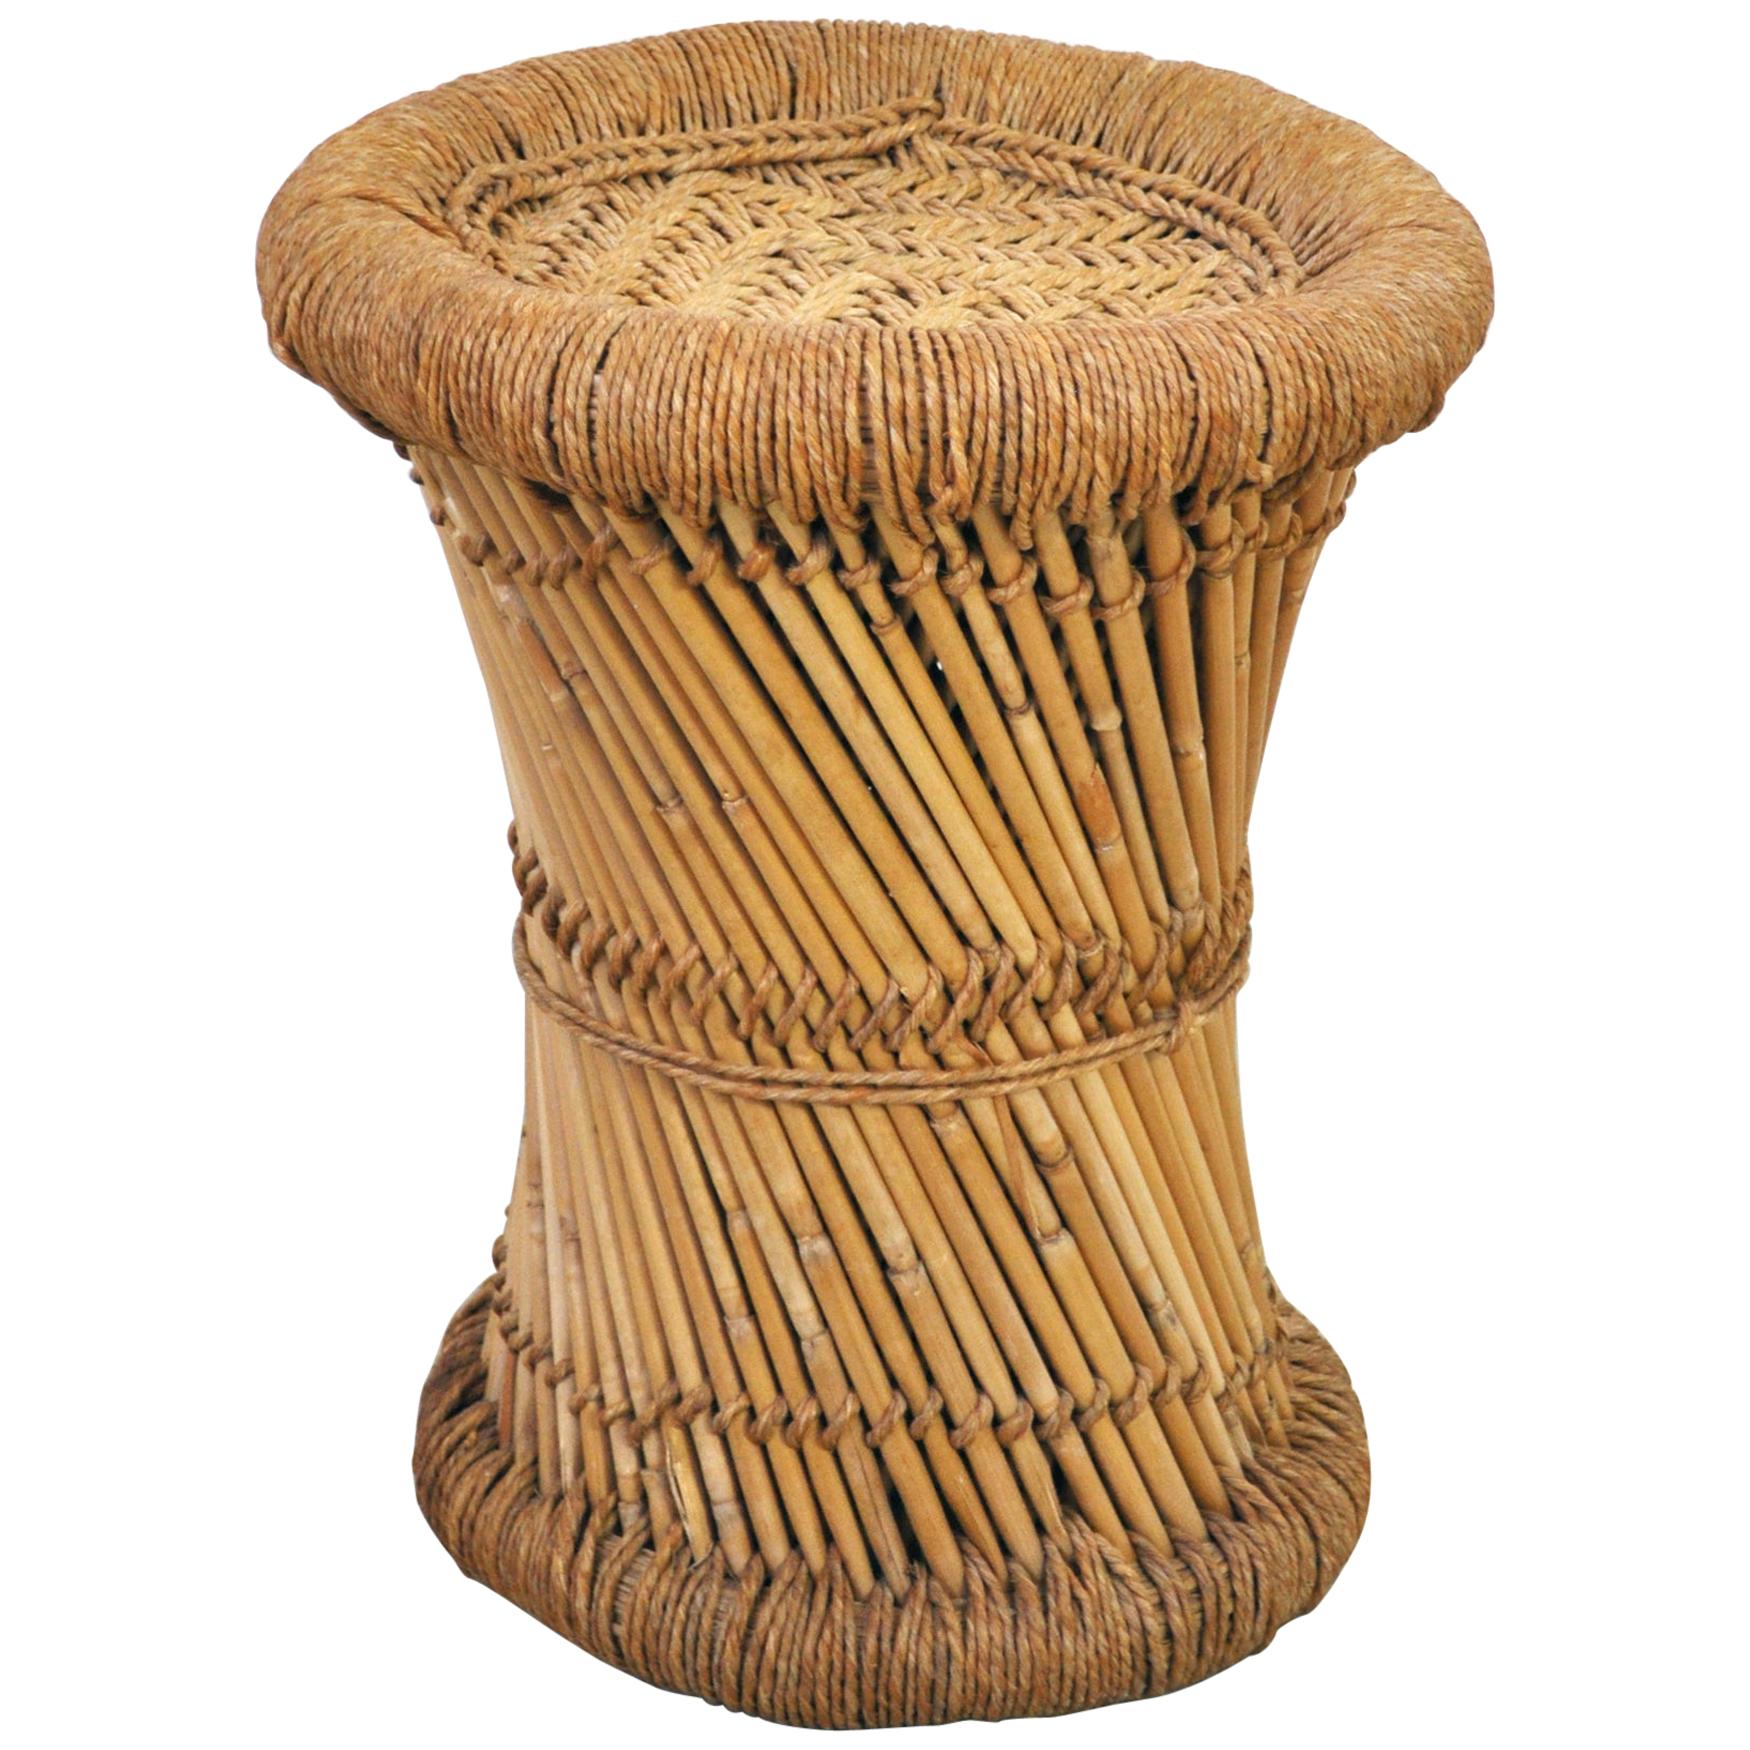 Bamboo and Rattan Stool or Side Table, 20th Century For Sale